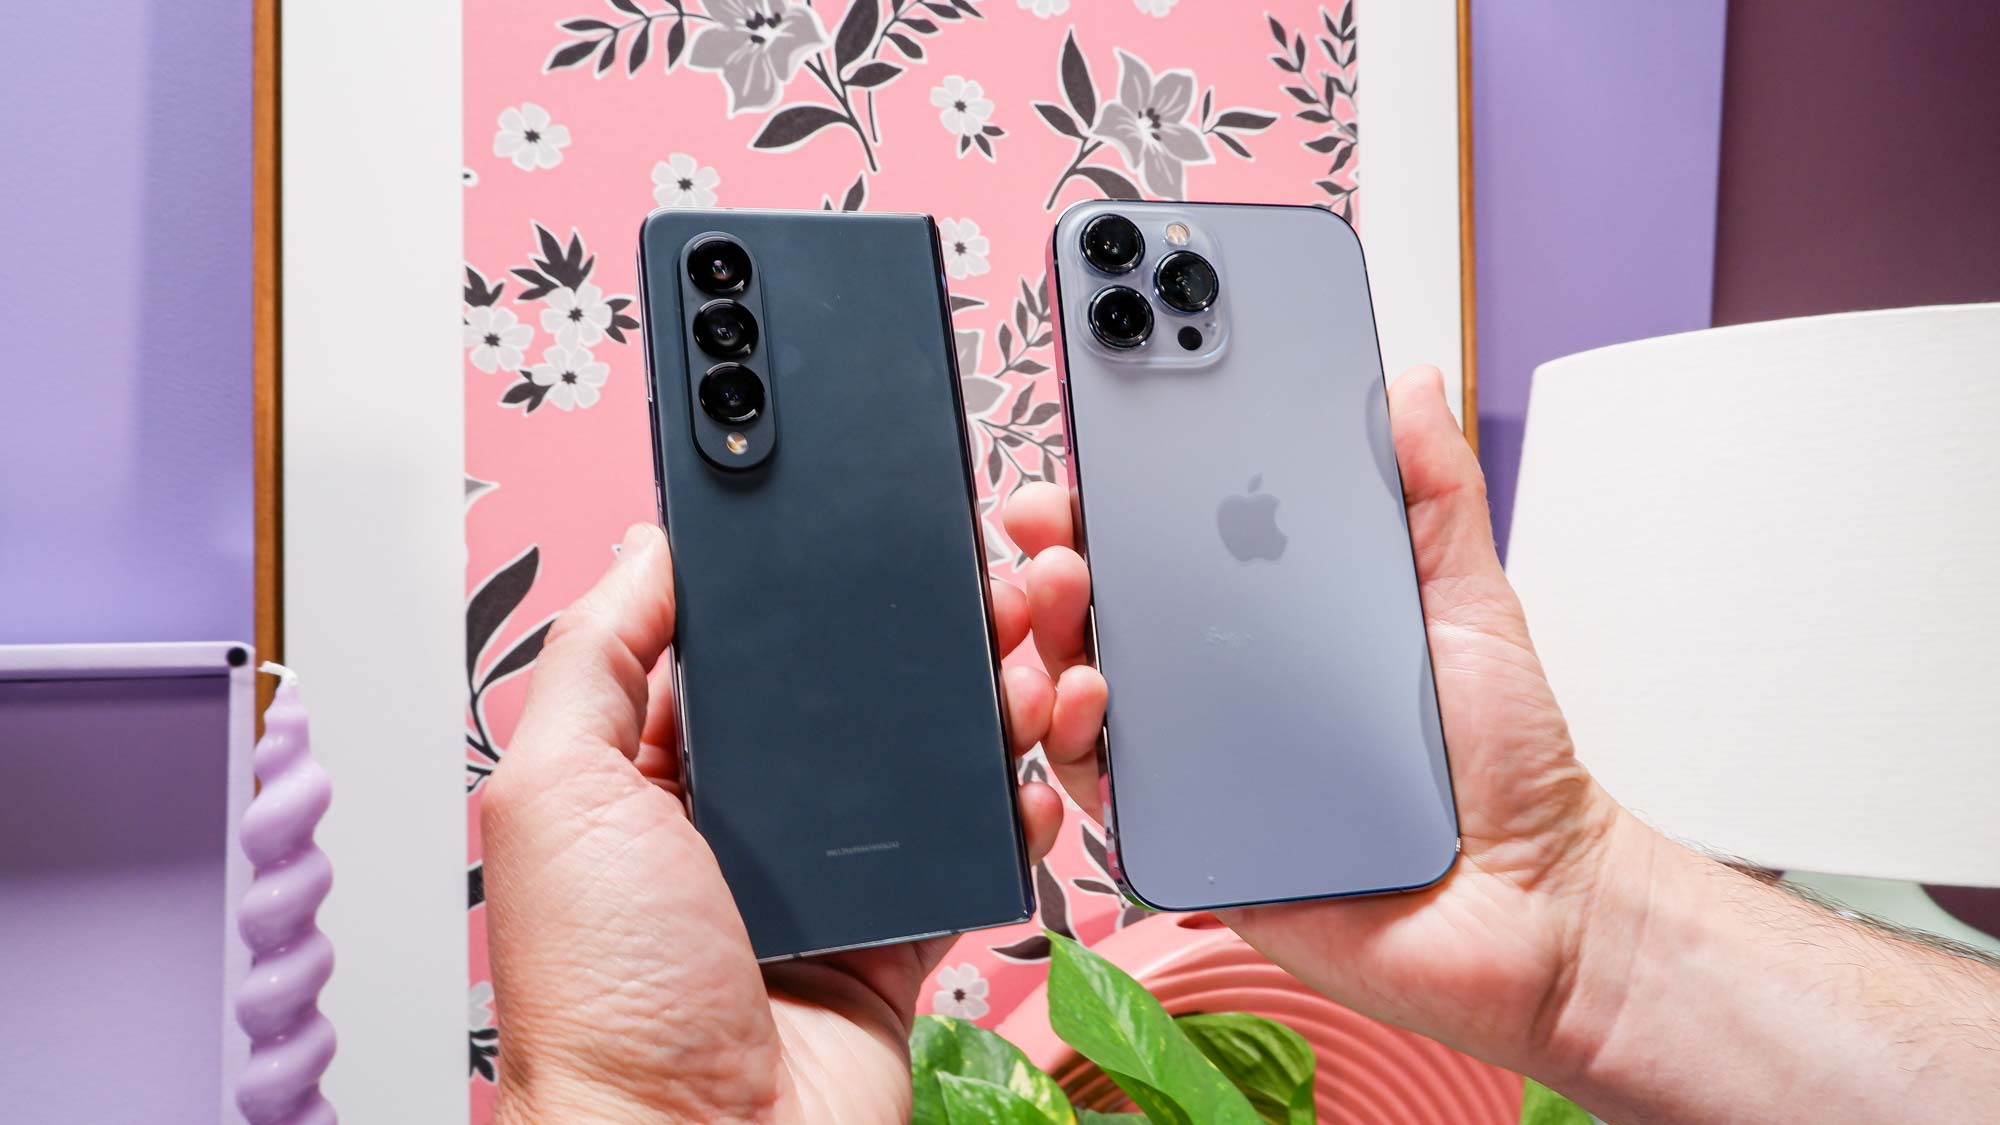 The Samsung Galaxy Z Fold 4 and iPhone 13 Pro Max side-by-side